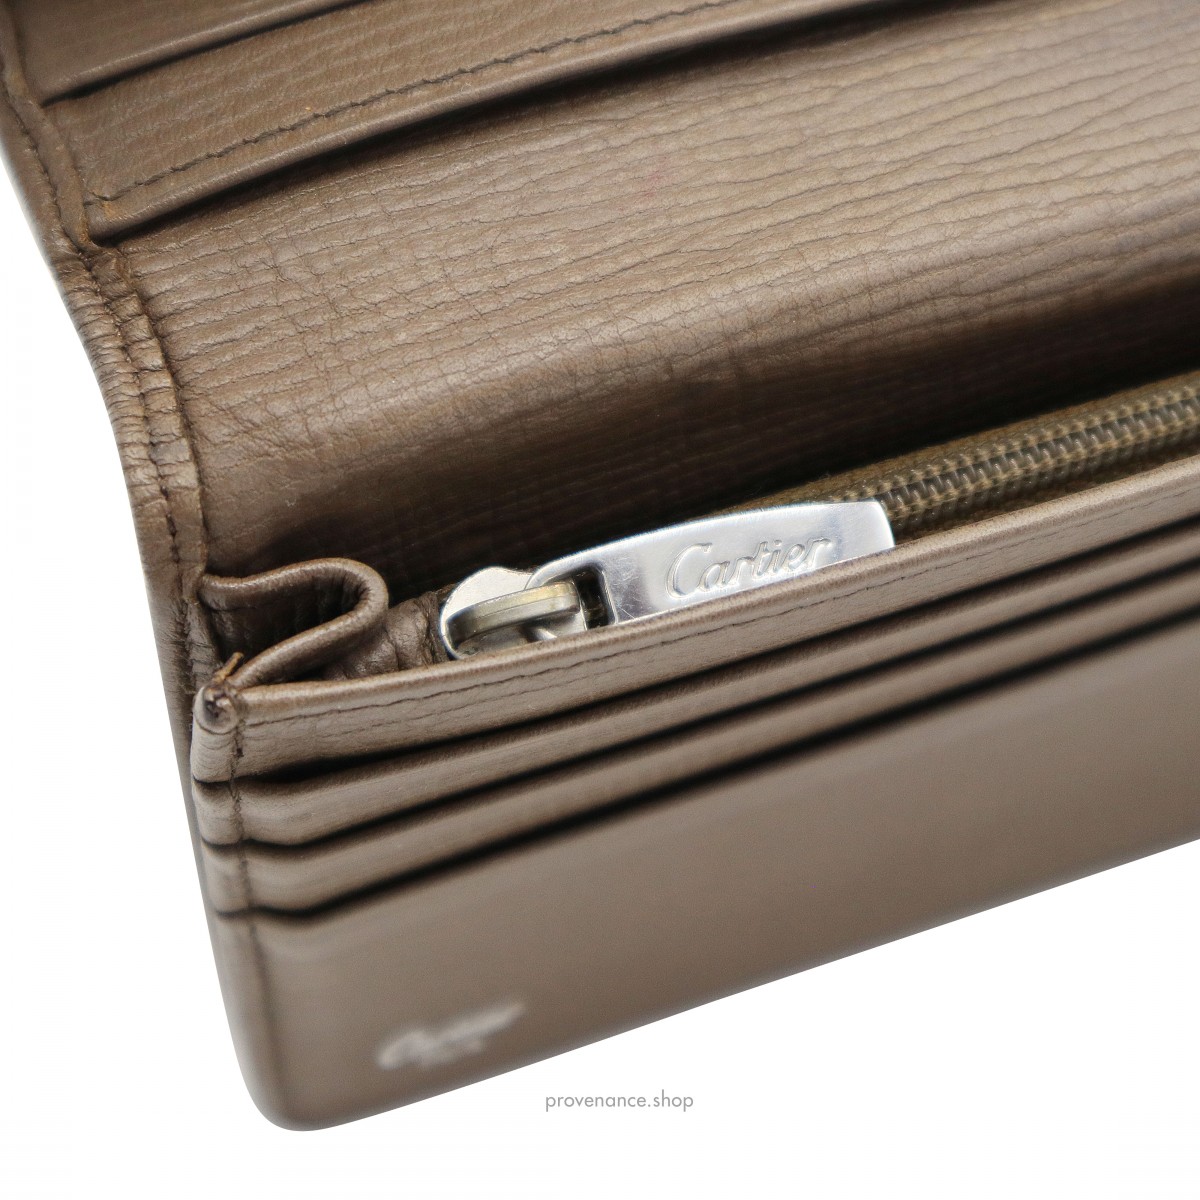 Cartier Long Wallet - Taupe Leather - 7